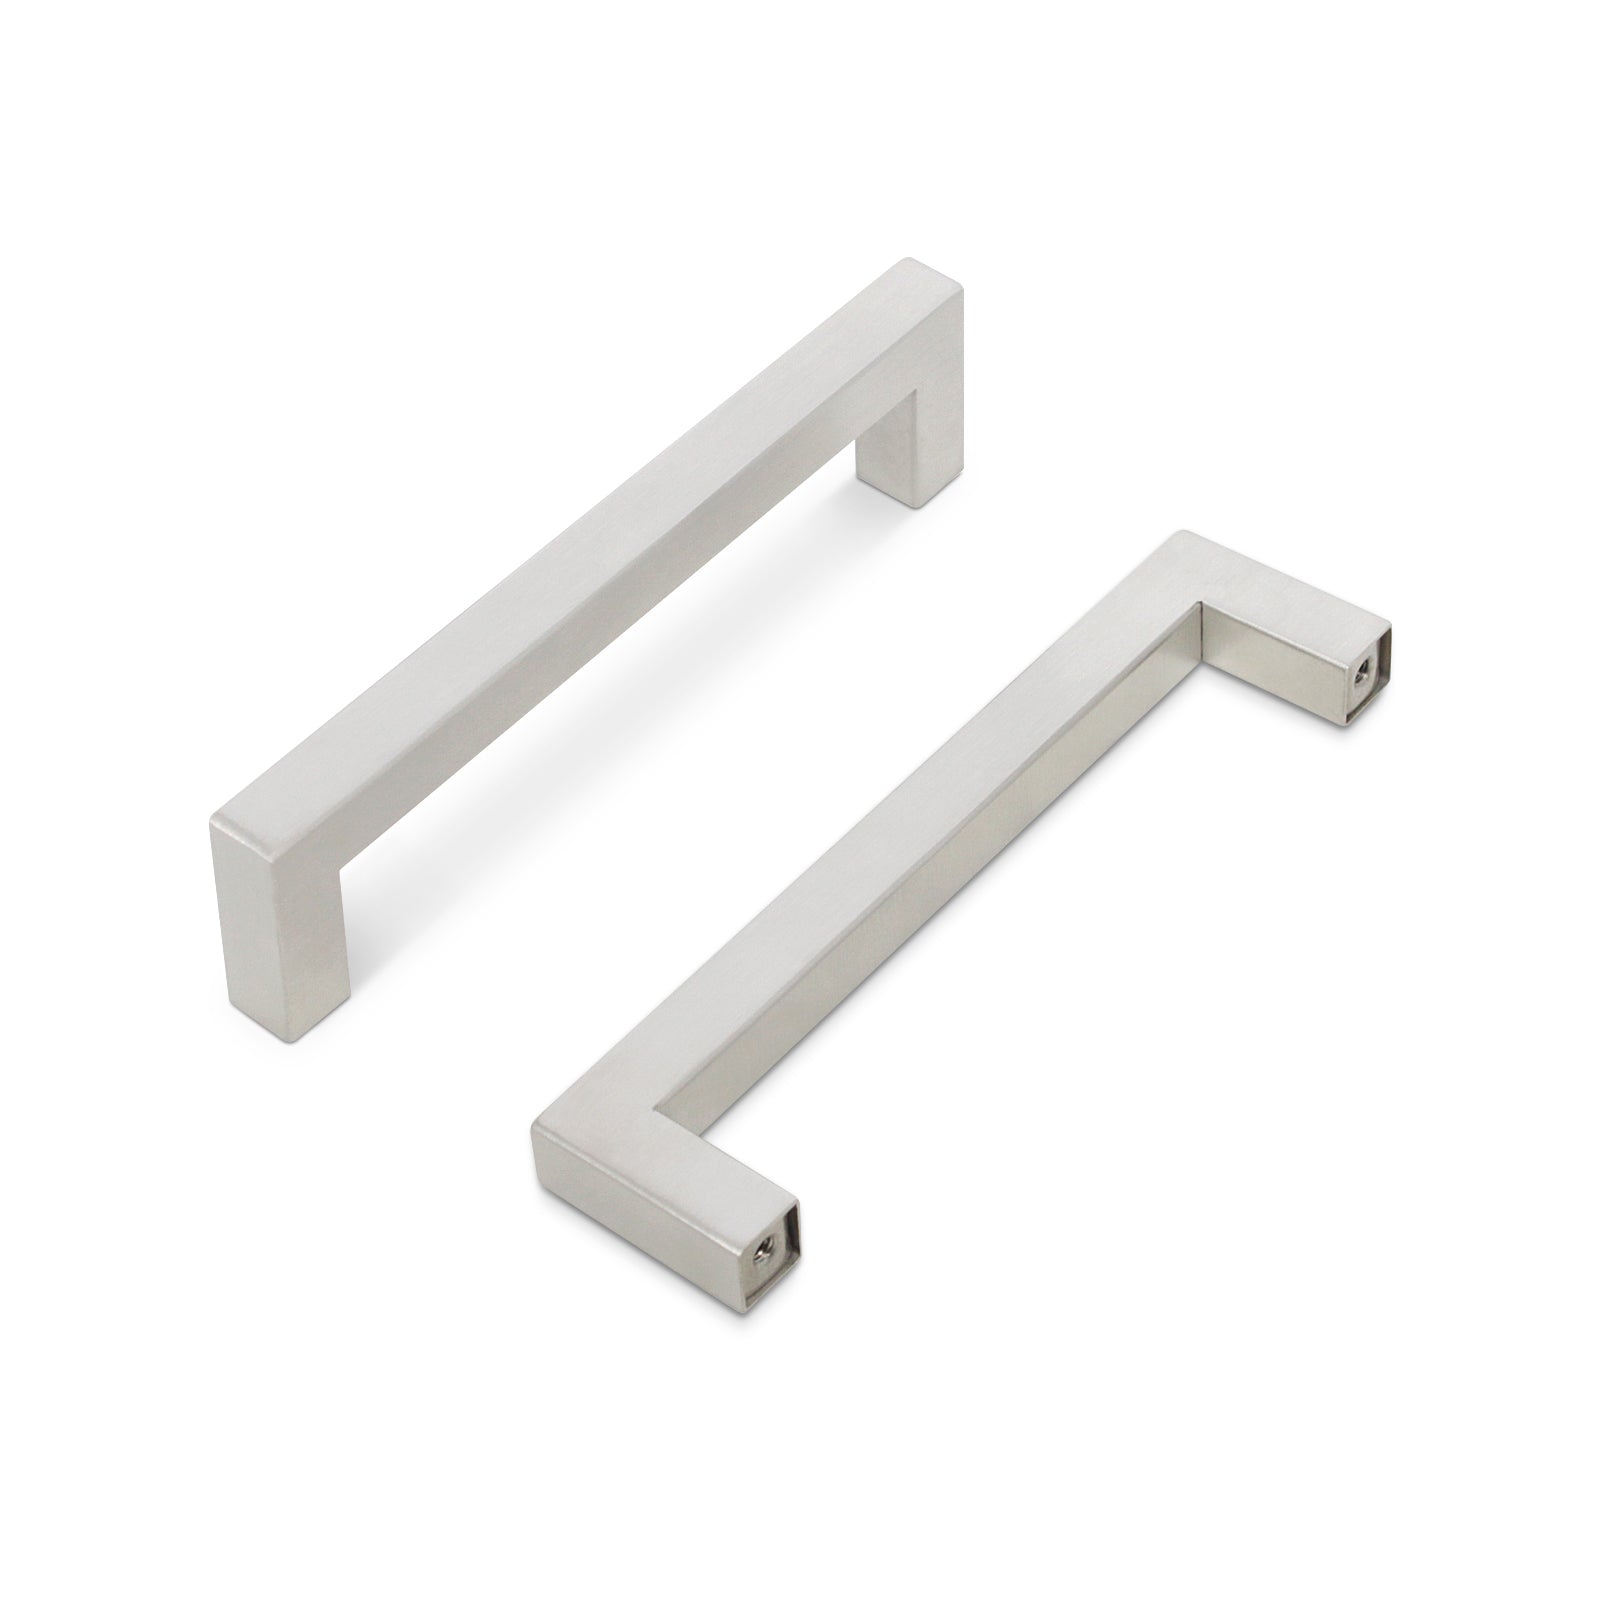 Cabinet Drawer Handles 5 inch 128mm Center to Center 5 Pack Brushed Stainless Steel Furniture Hardware